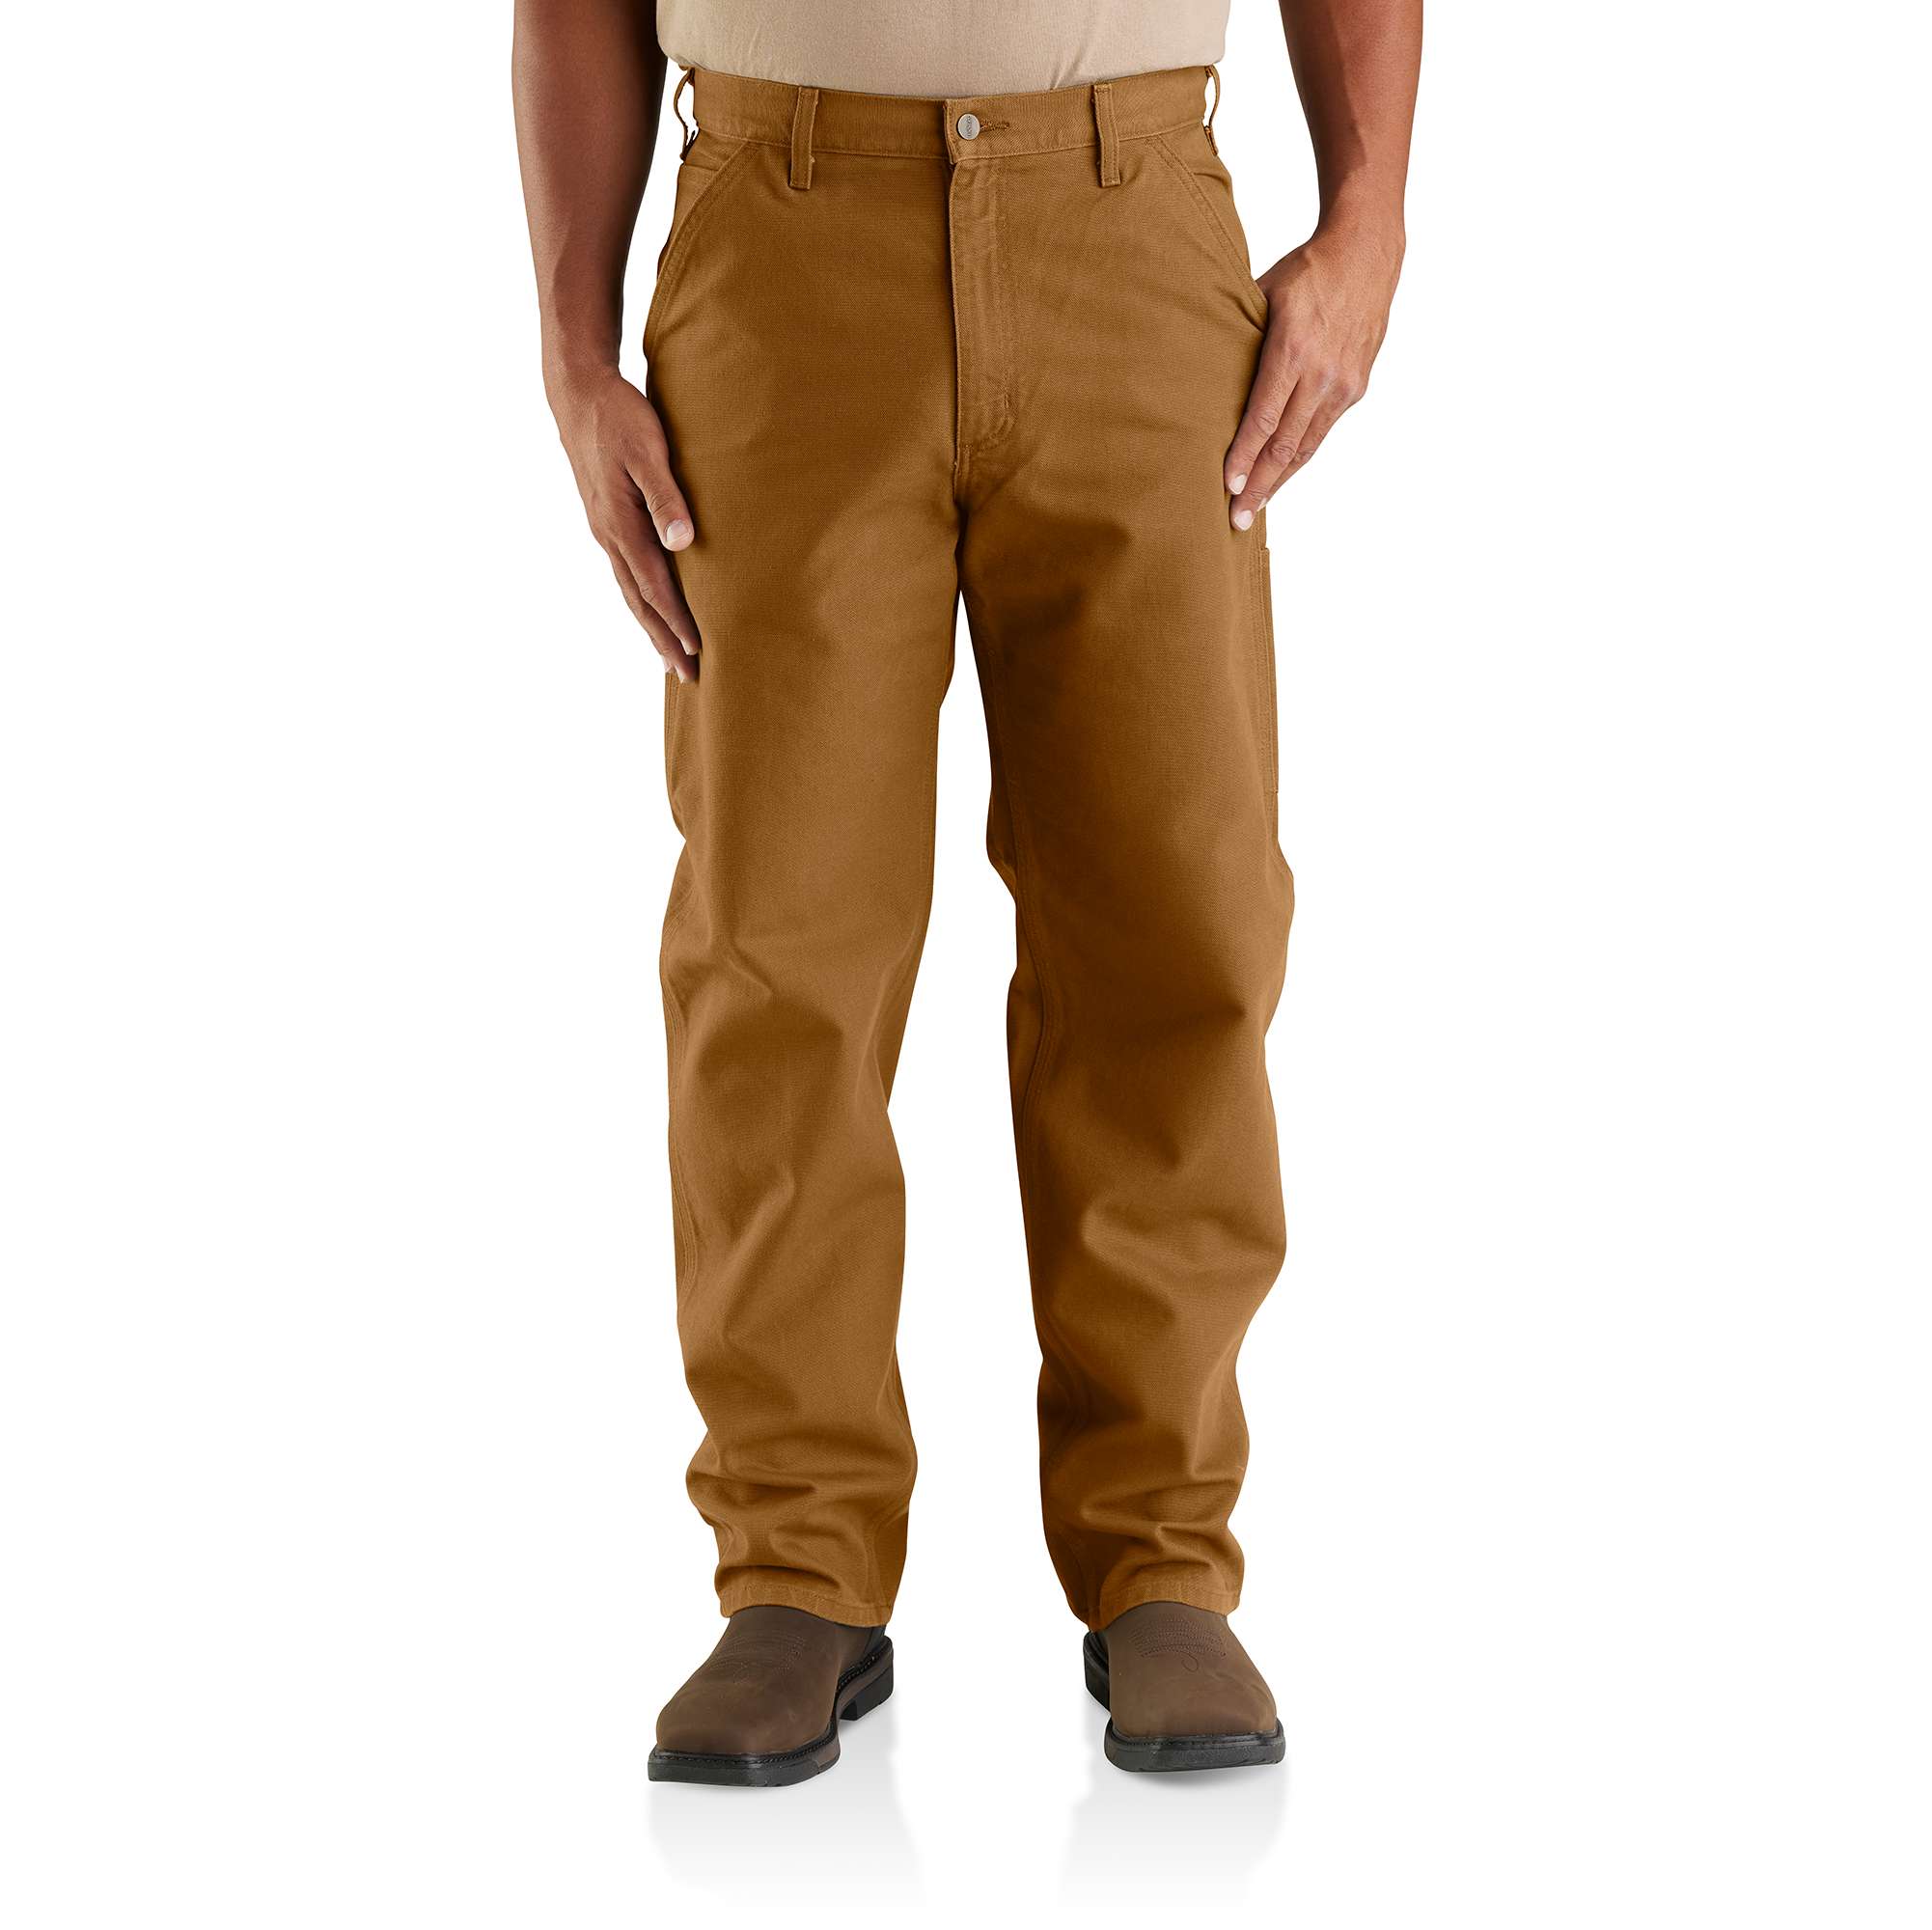  Carhartt mens Force Relaxed Fit Ripstop Work Utility Pants,  Tarmac, 30W x 30L US: Clothing, Shoes & Jewelry